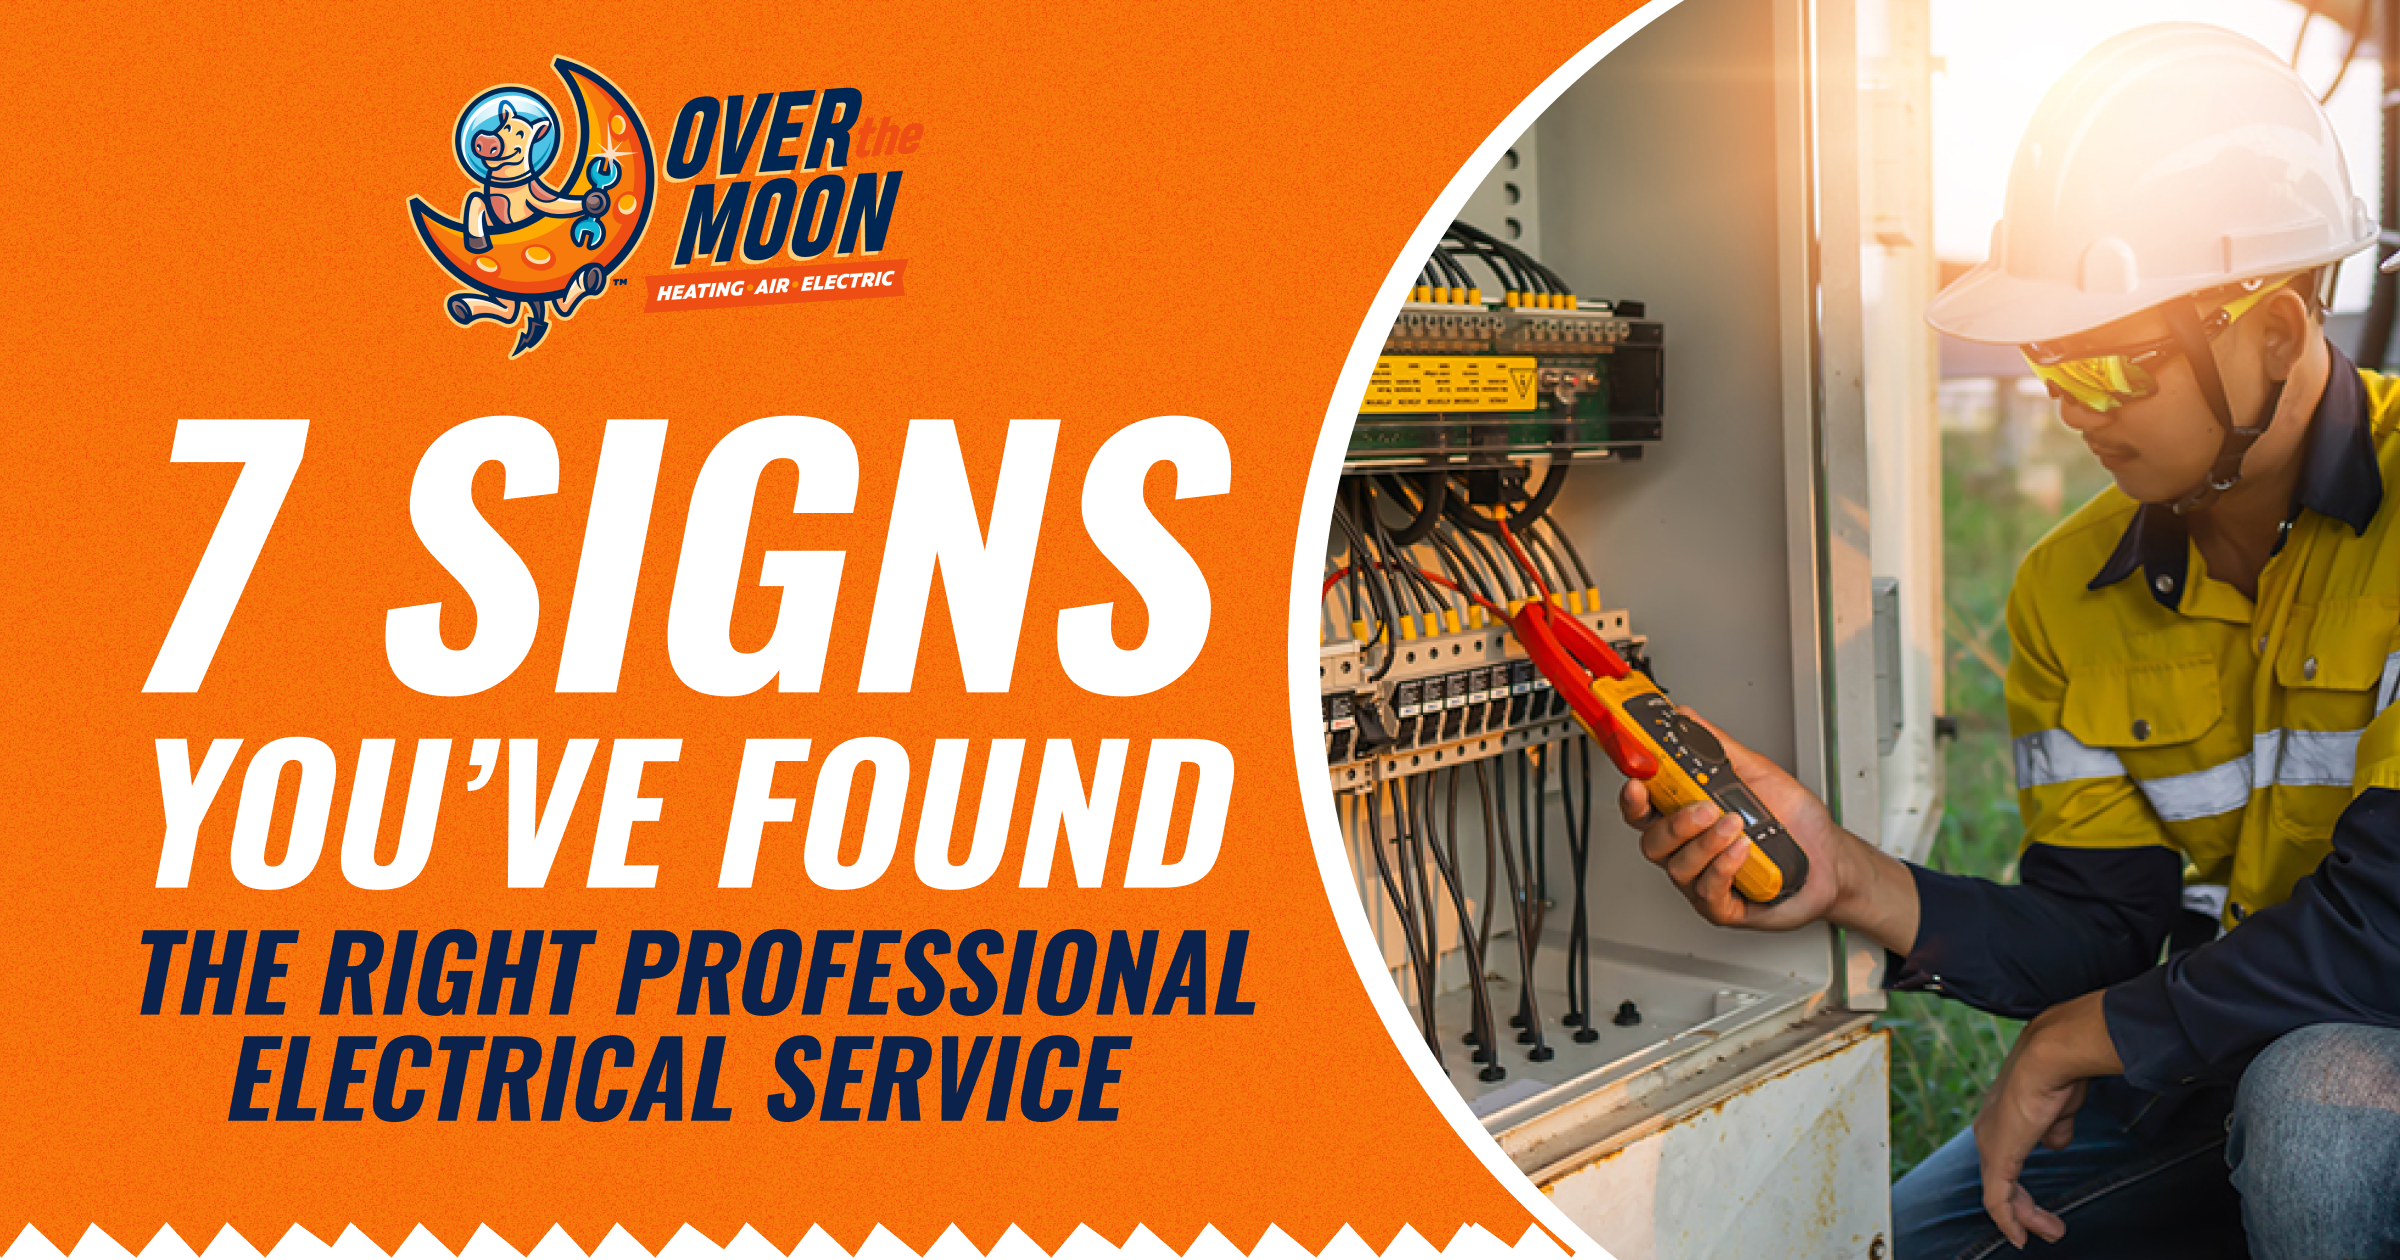 Over The Moon 7 Signs You’ve Found The Right Professional Electrical Service (1)